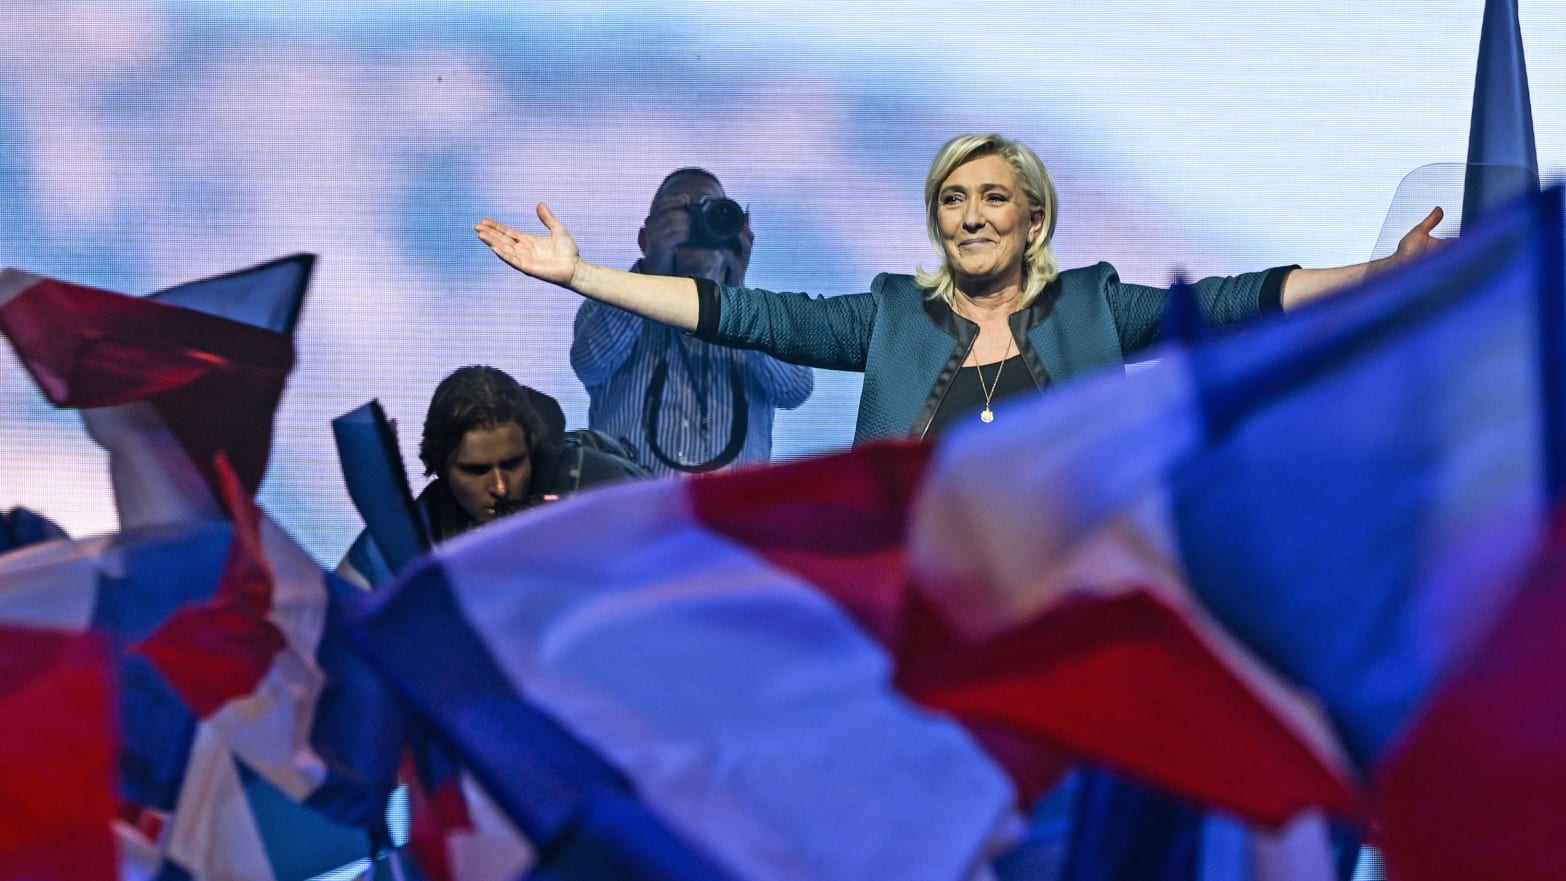 Marine Le Pen gestures to a crowd waving French flags